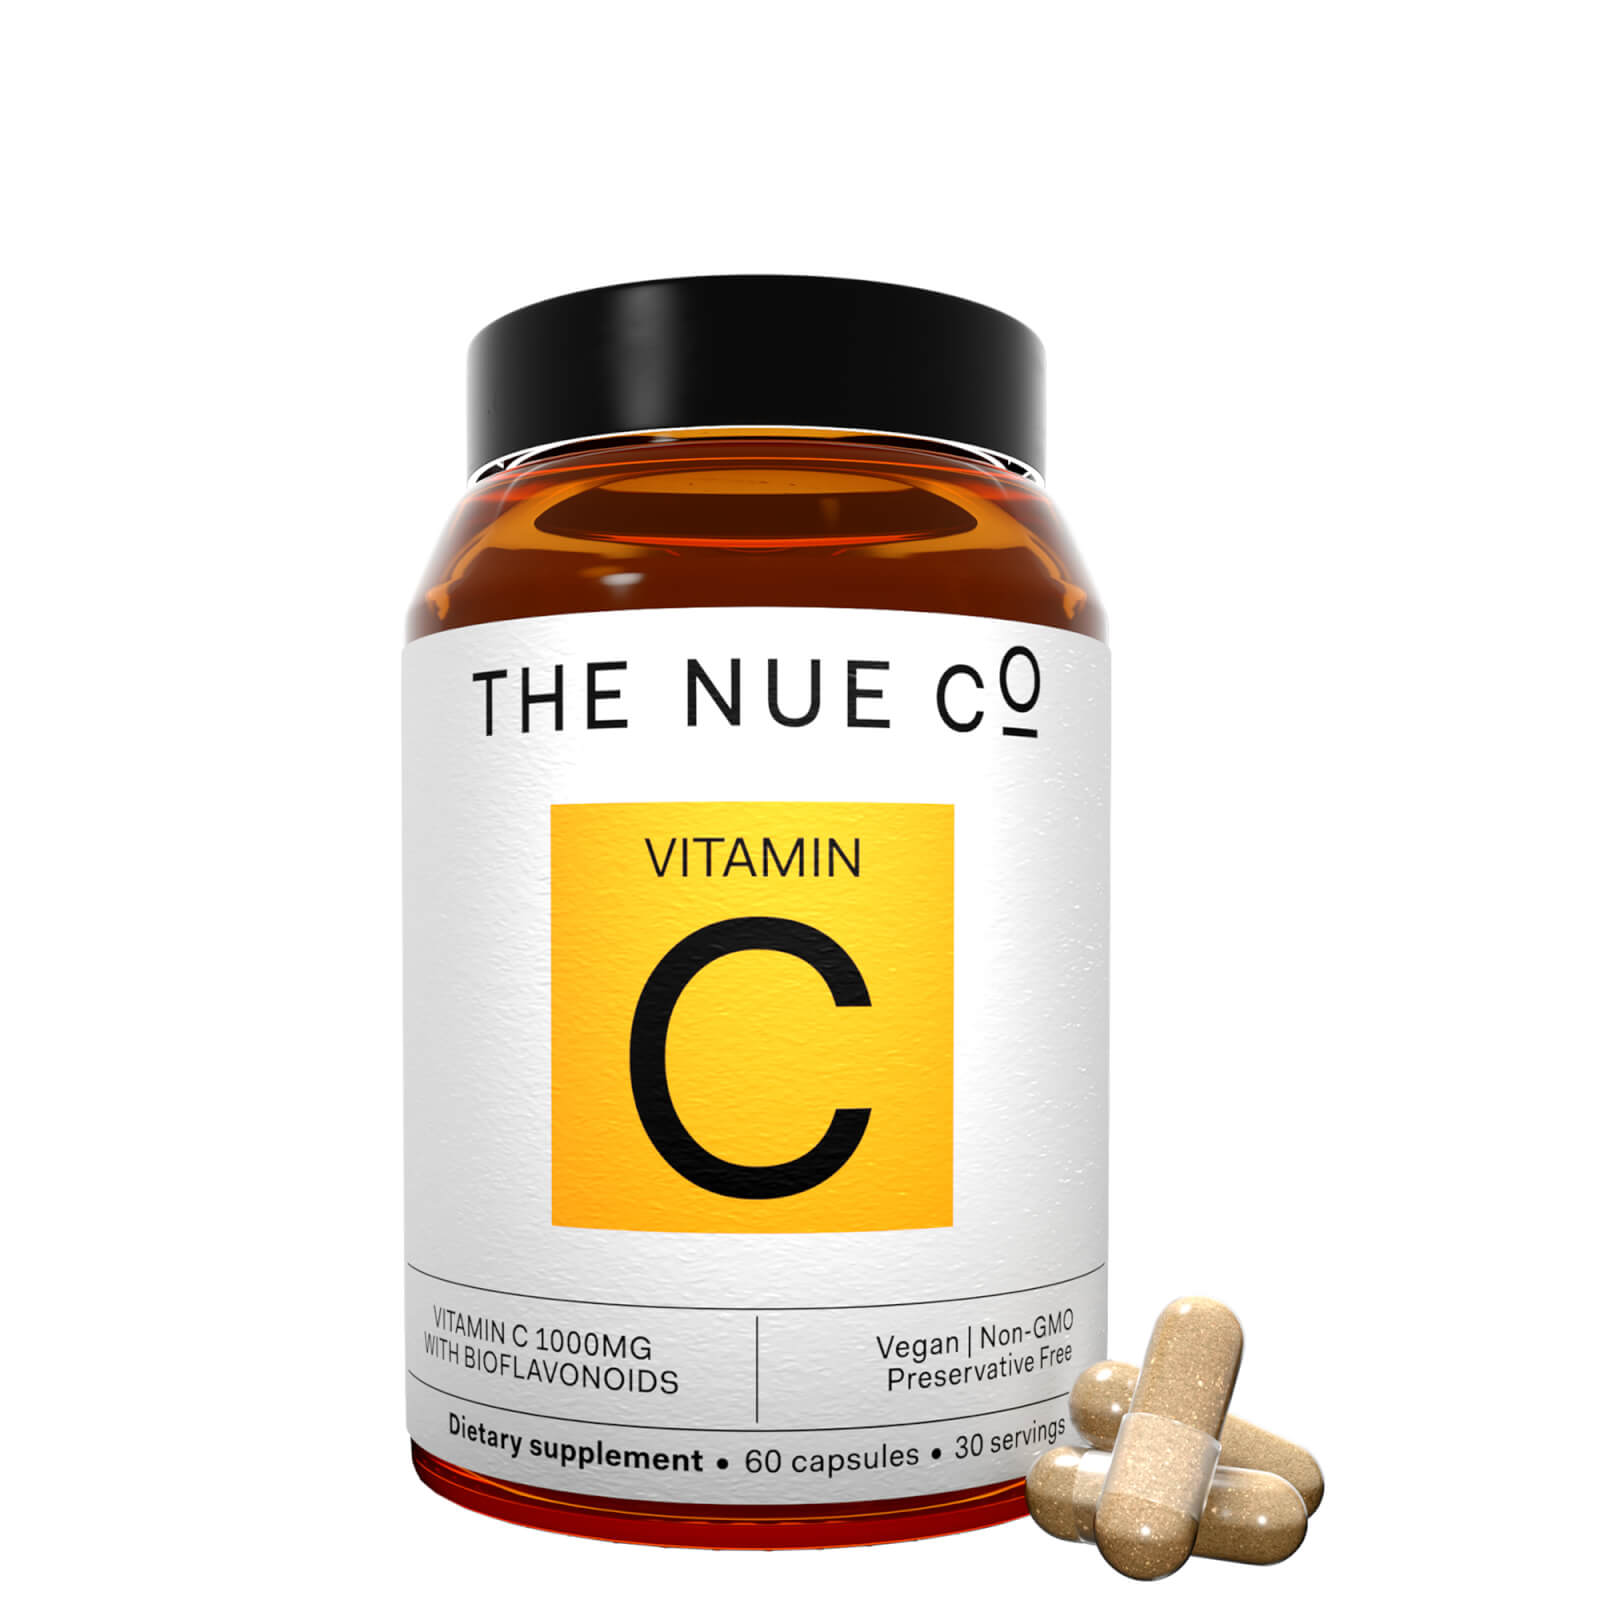 The Nue Co Vitamin C Supplement To Support Immunity (60 Capsules) In White